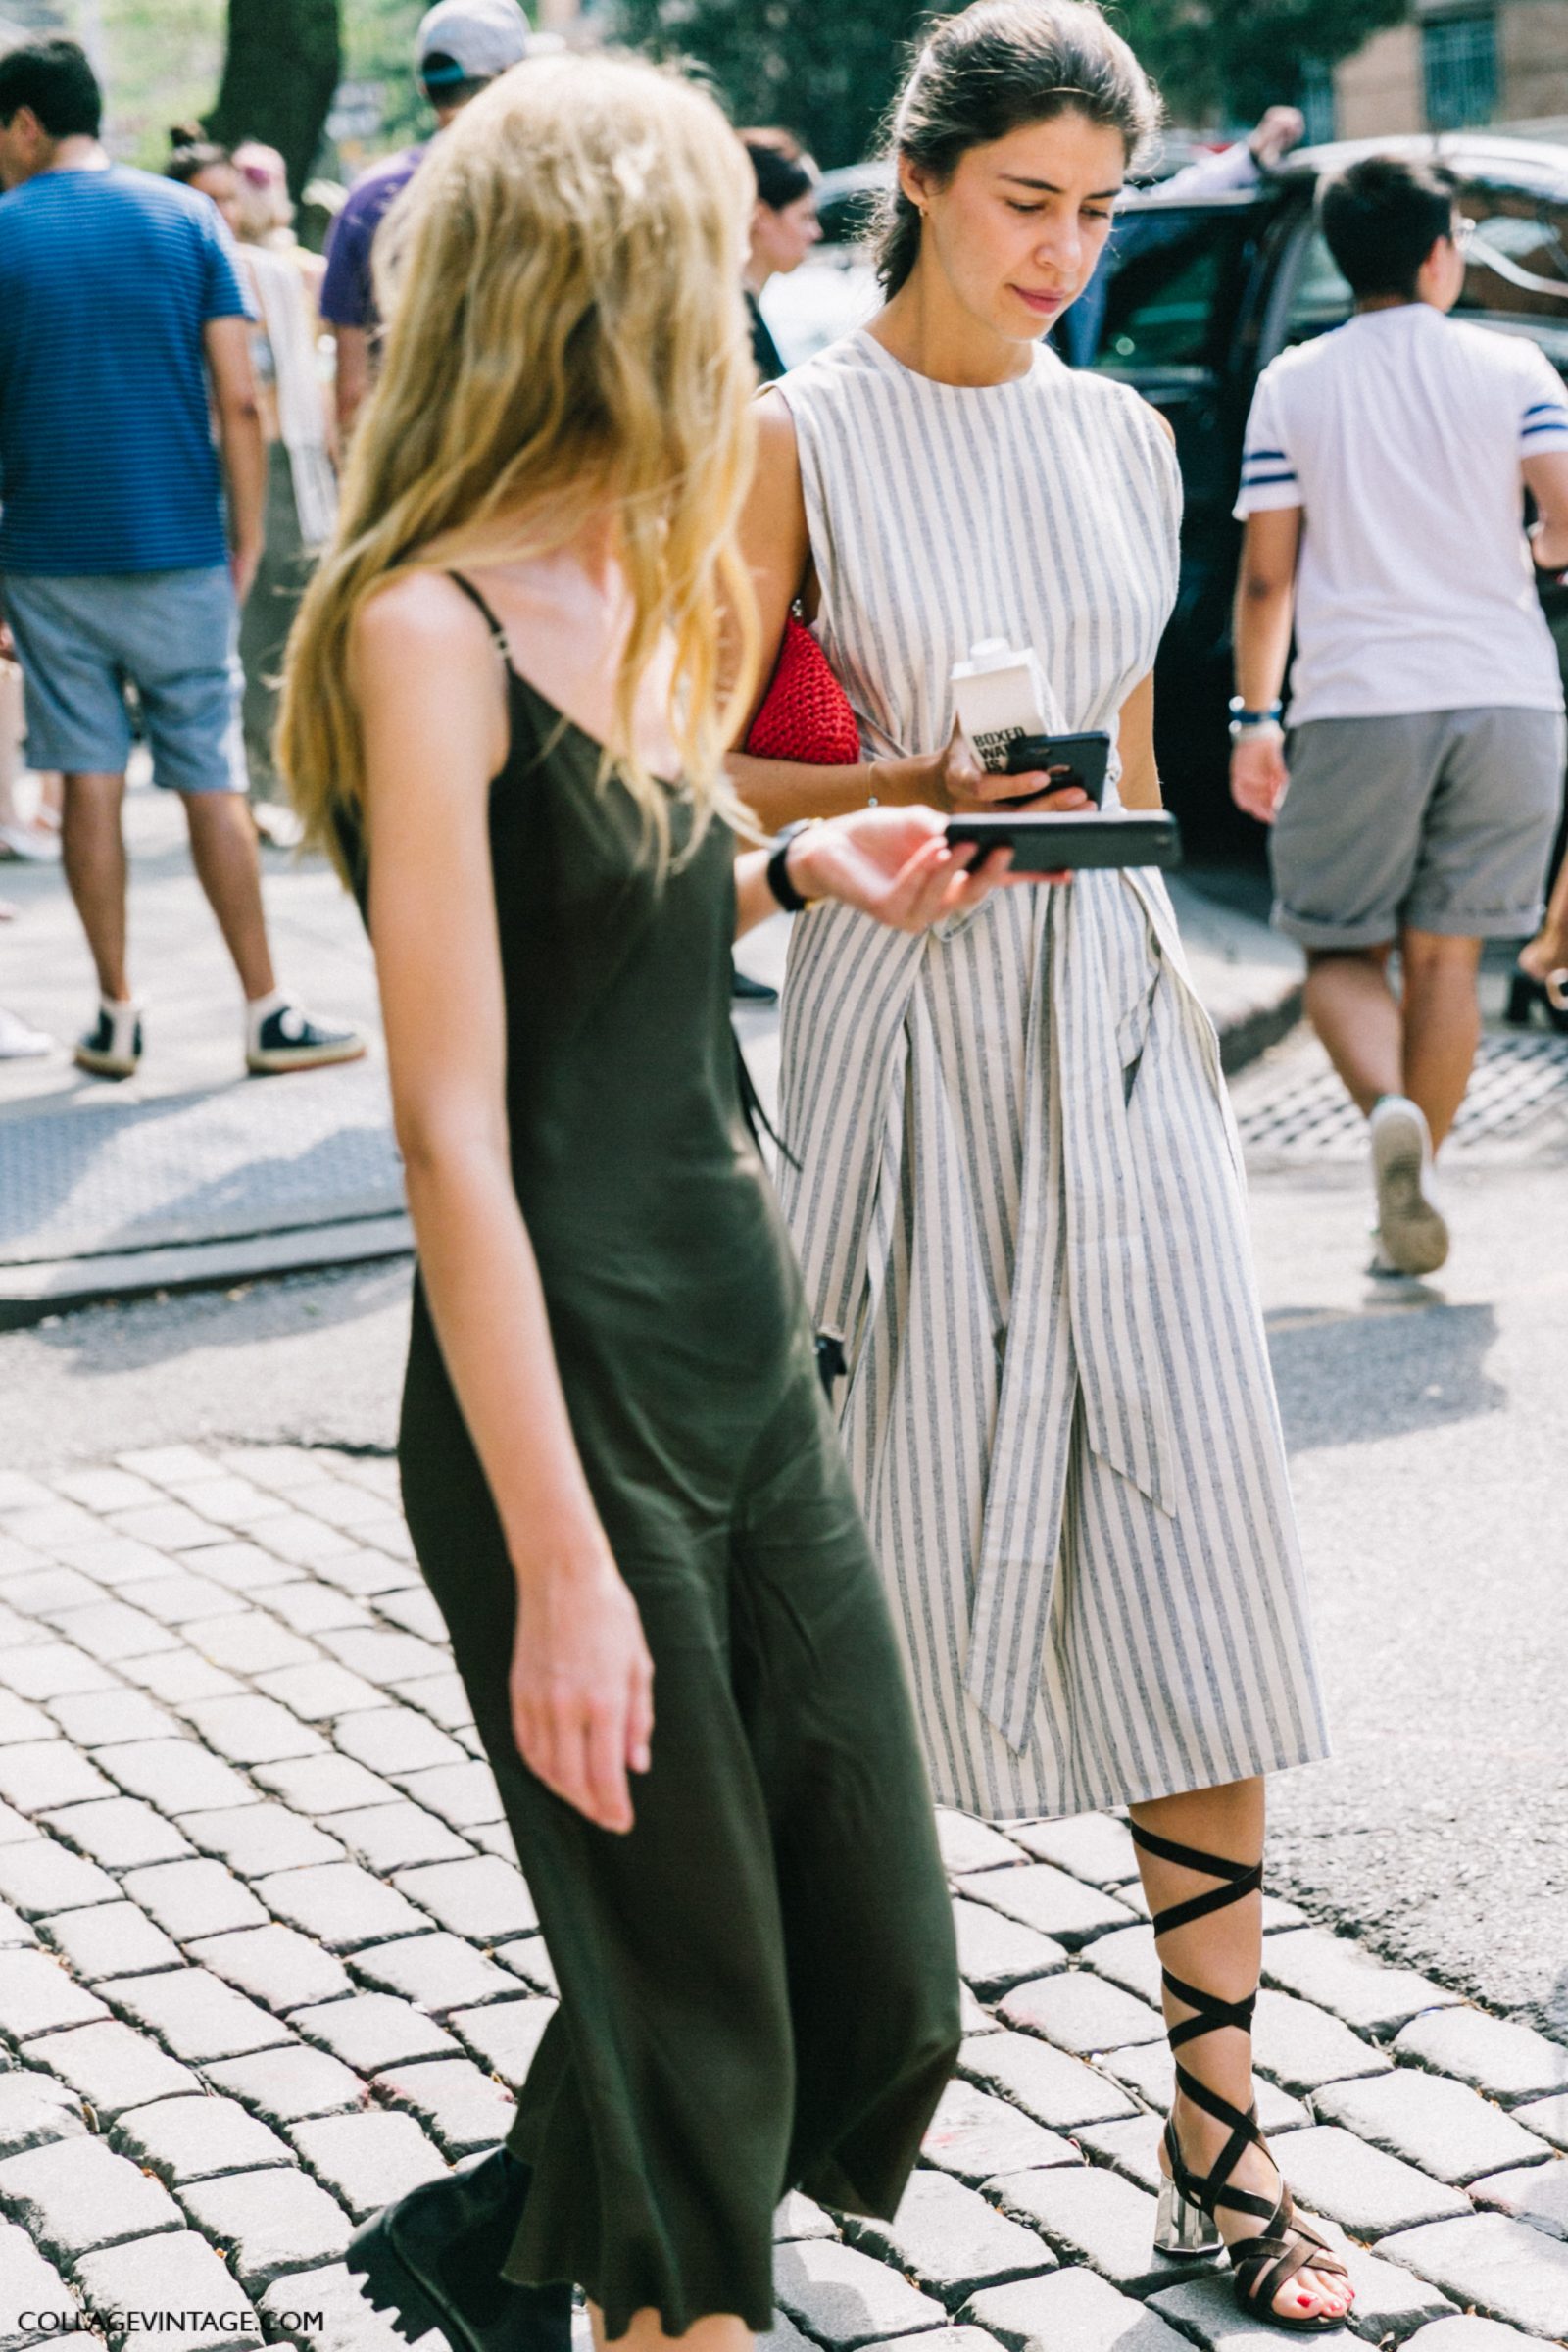 nyfw-new_york_fashion_week_ss17-street_style-outfits-collage_vintage-12